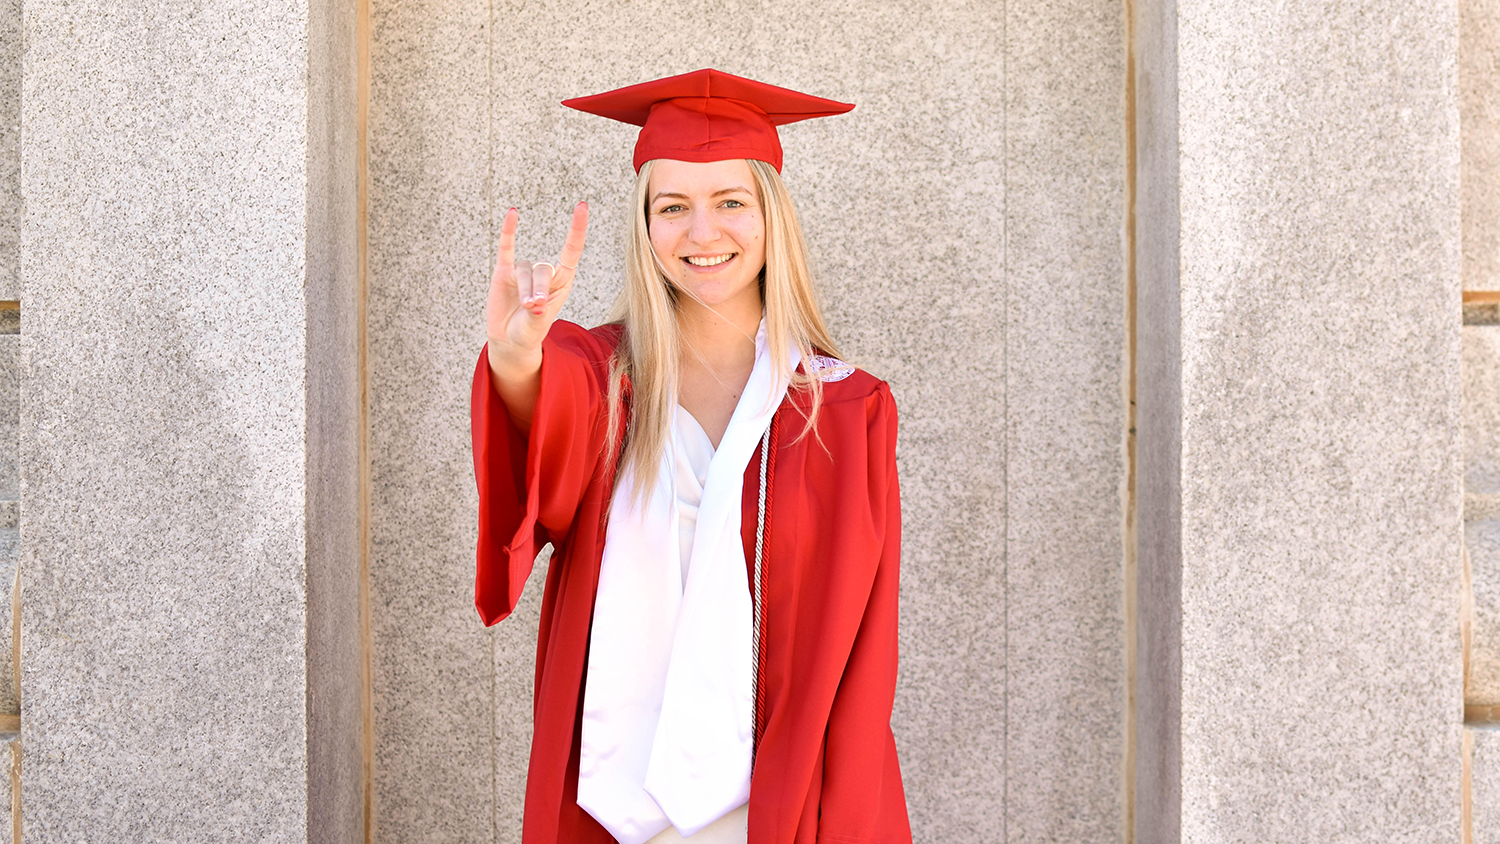 Heaven Davis - Graduation to Vocation: Heaven Davis is Providing Engineering Solutions - College of Natural Resources News NC State University